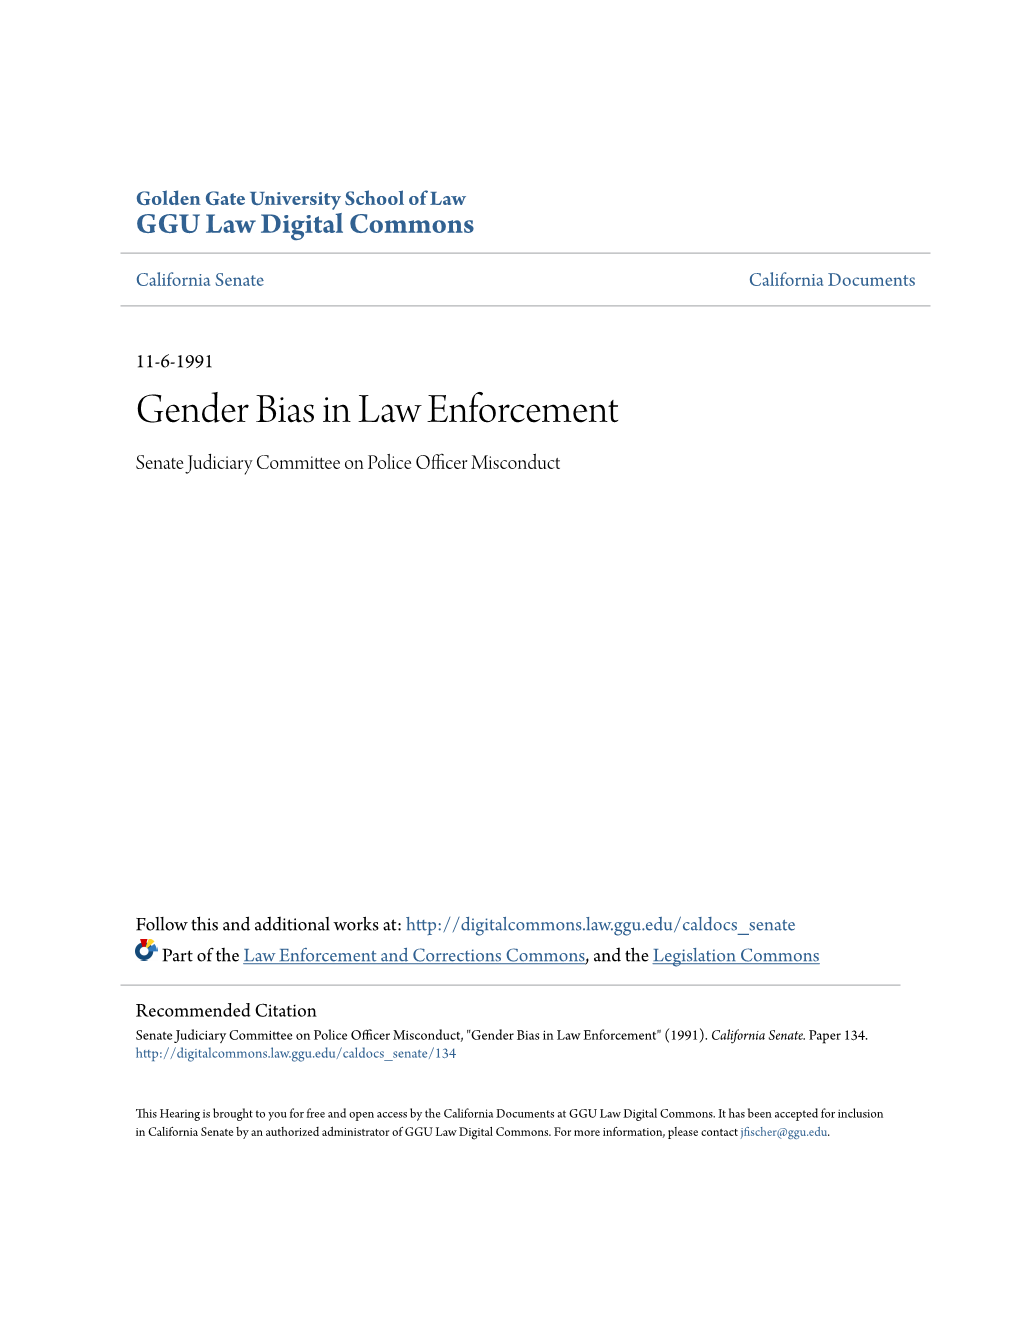 Gender Bias in Law Enforcement Senate Judiciary Committee on Police Officer Misconduct